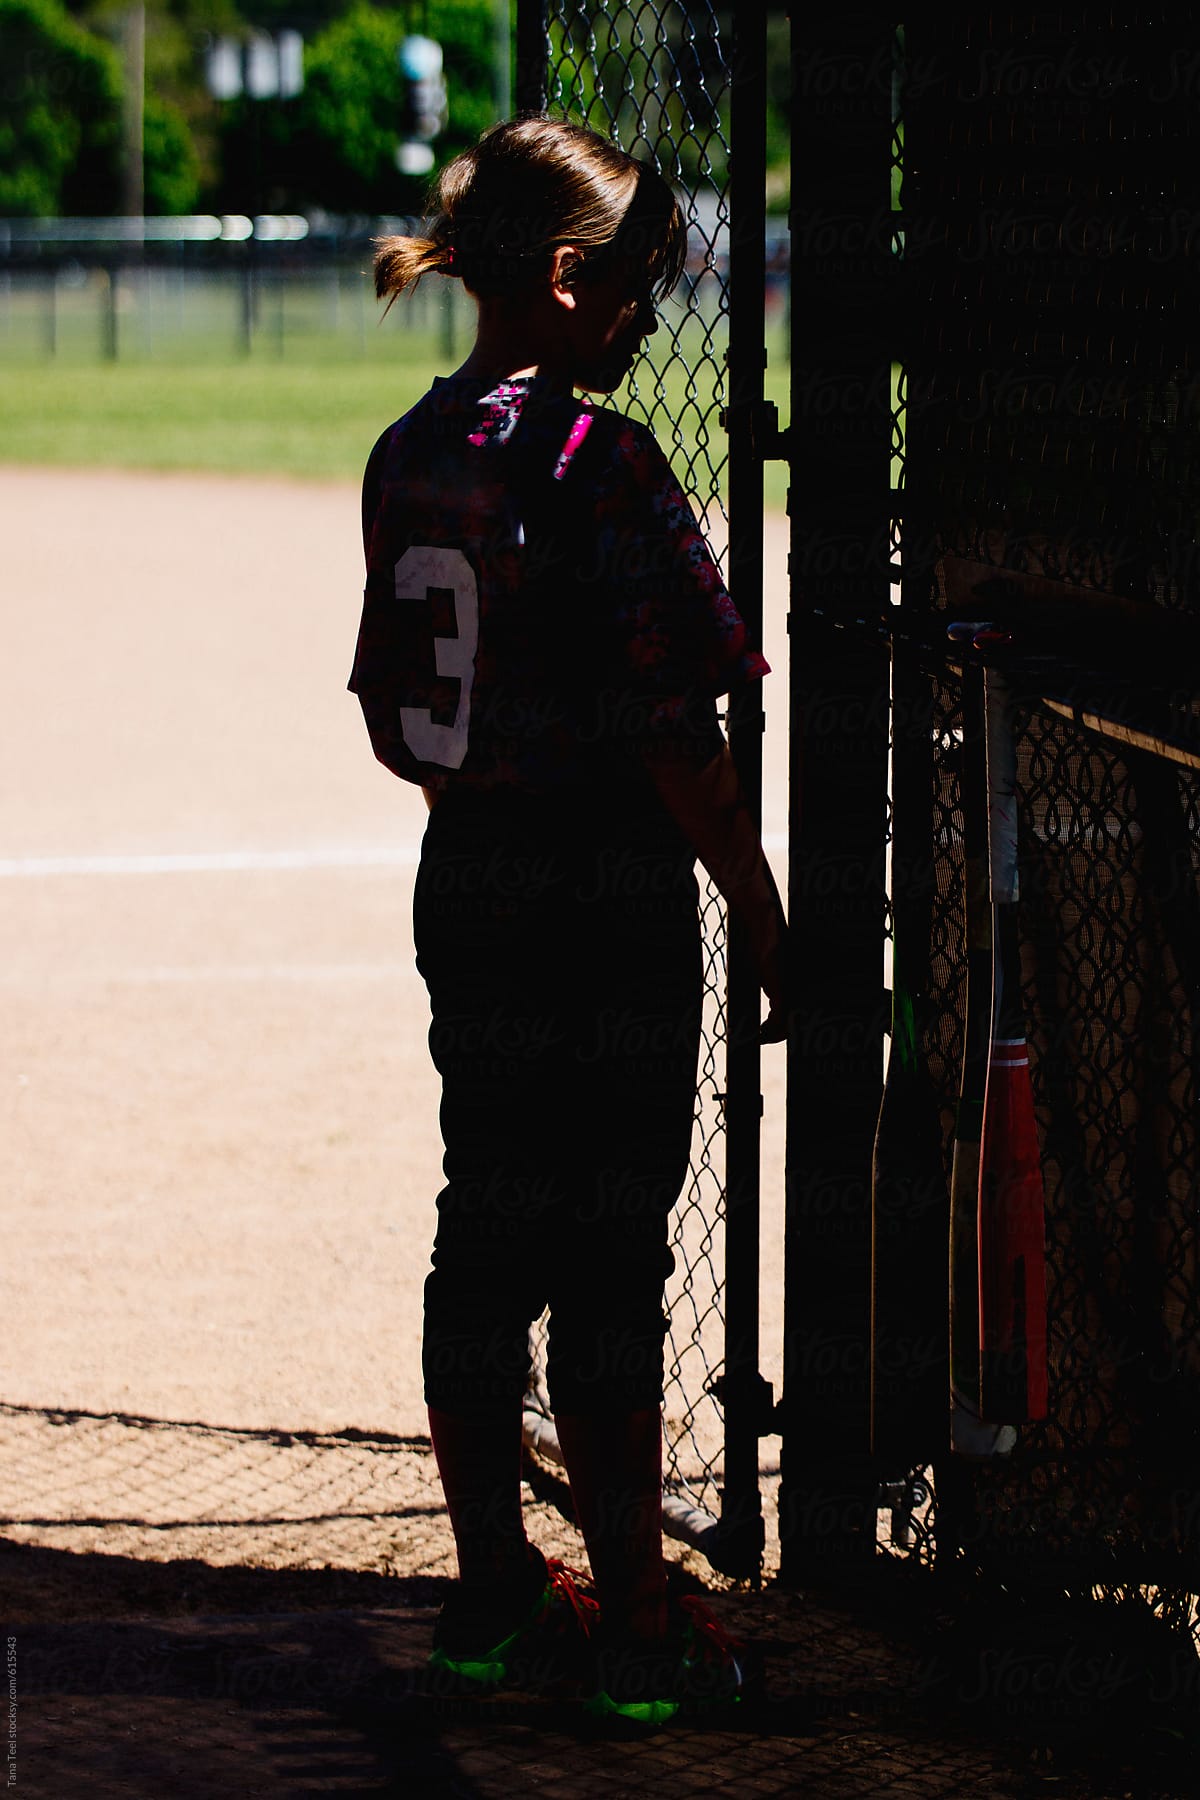 Young softball player stands in shadows of dugout